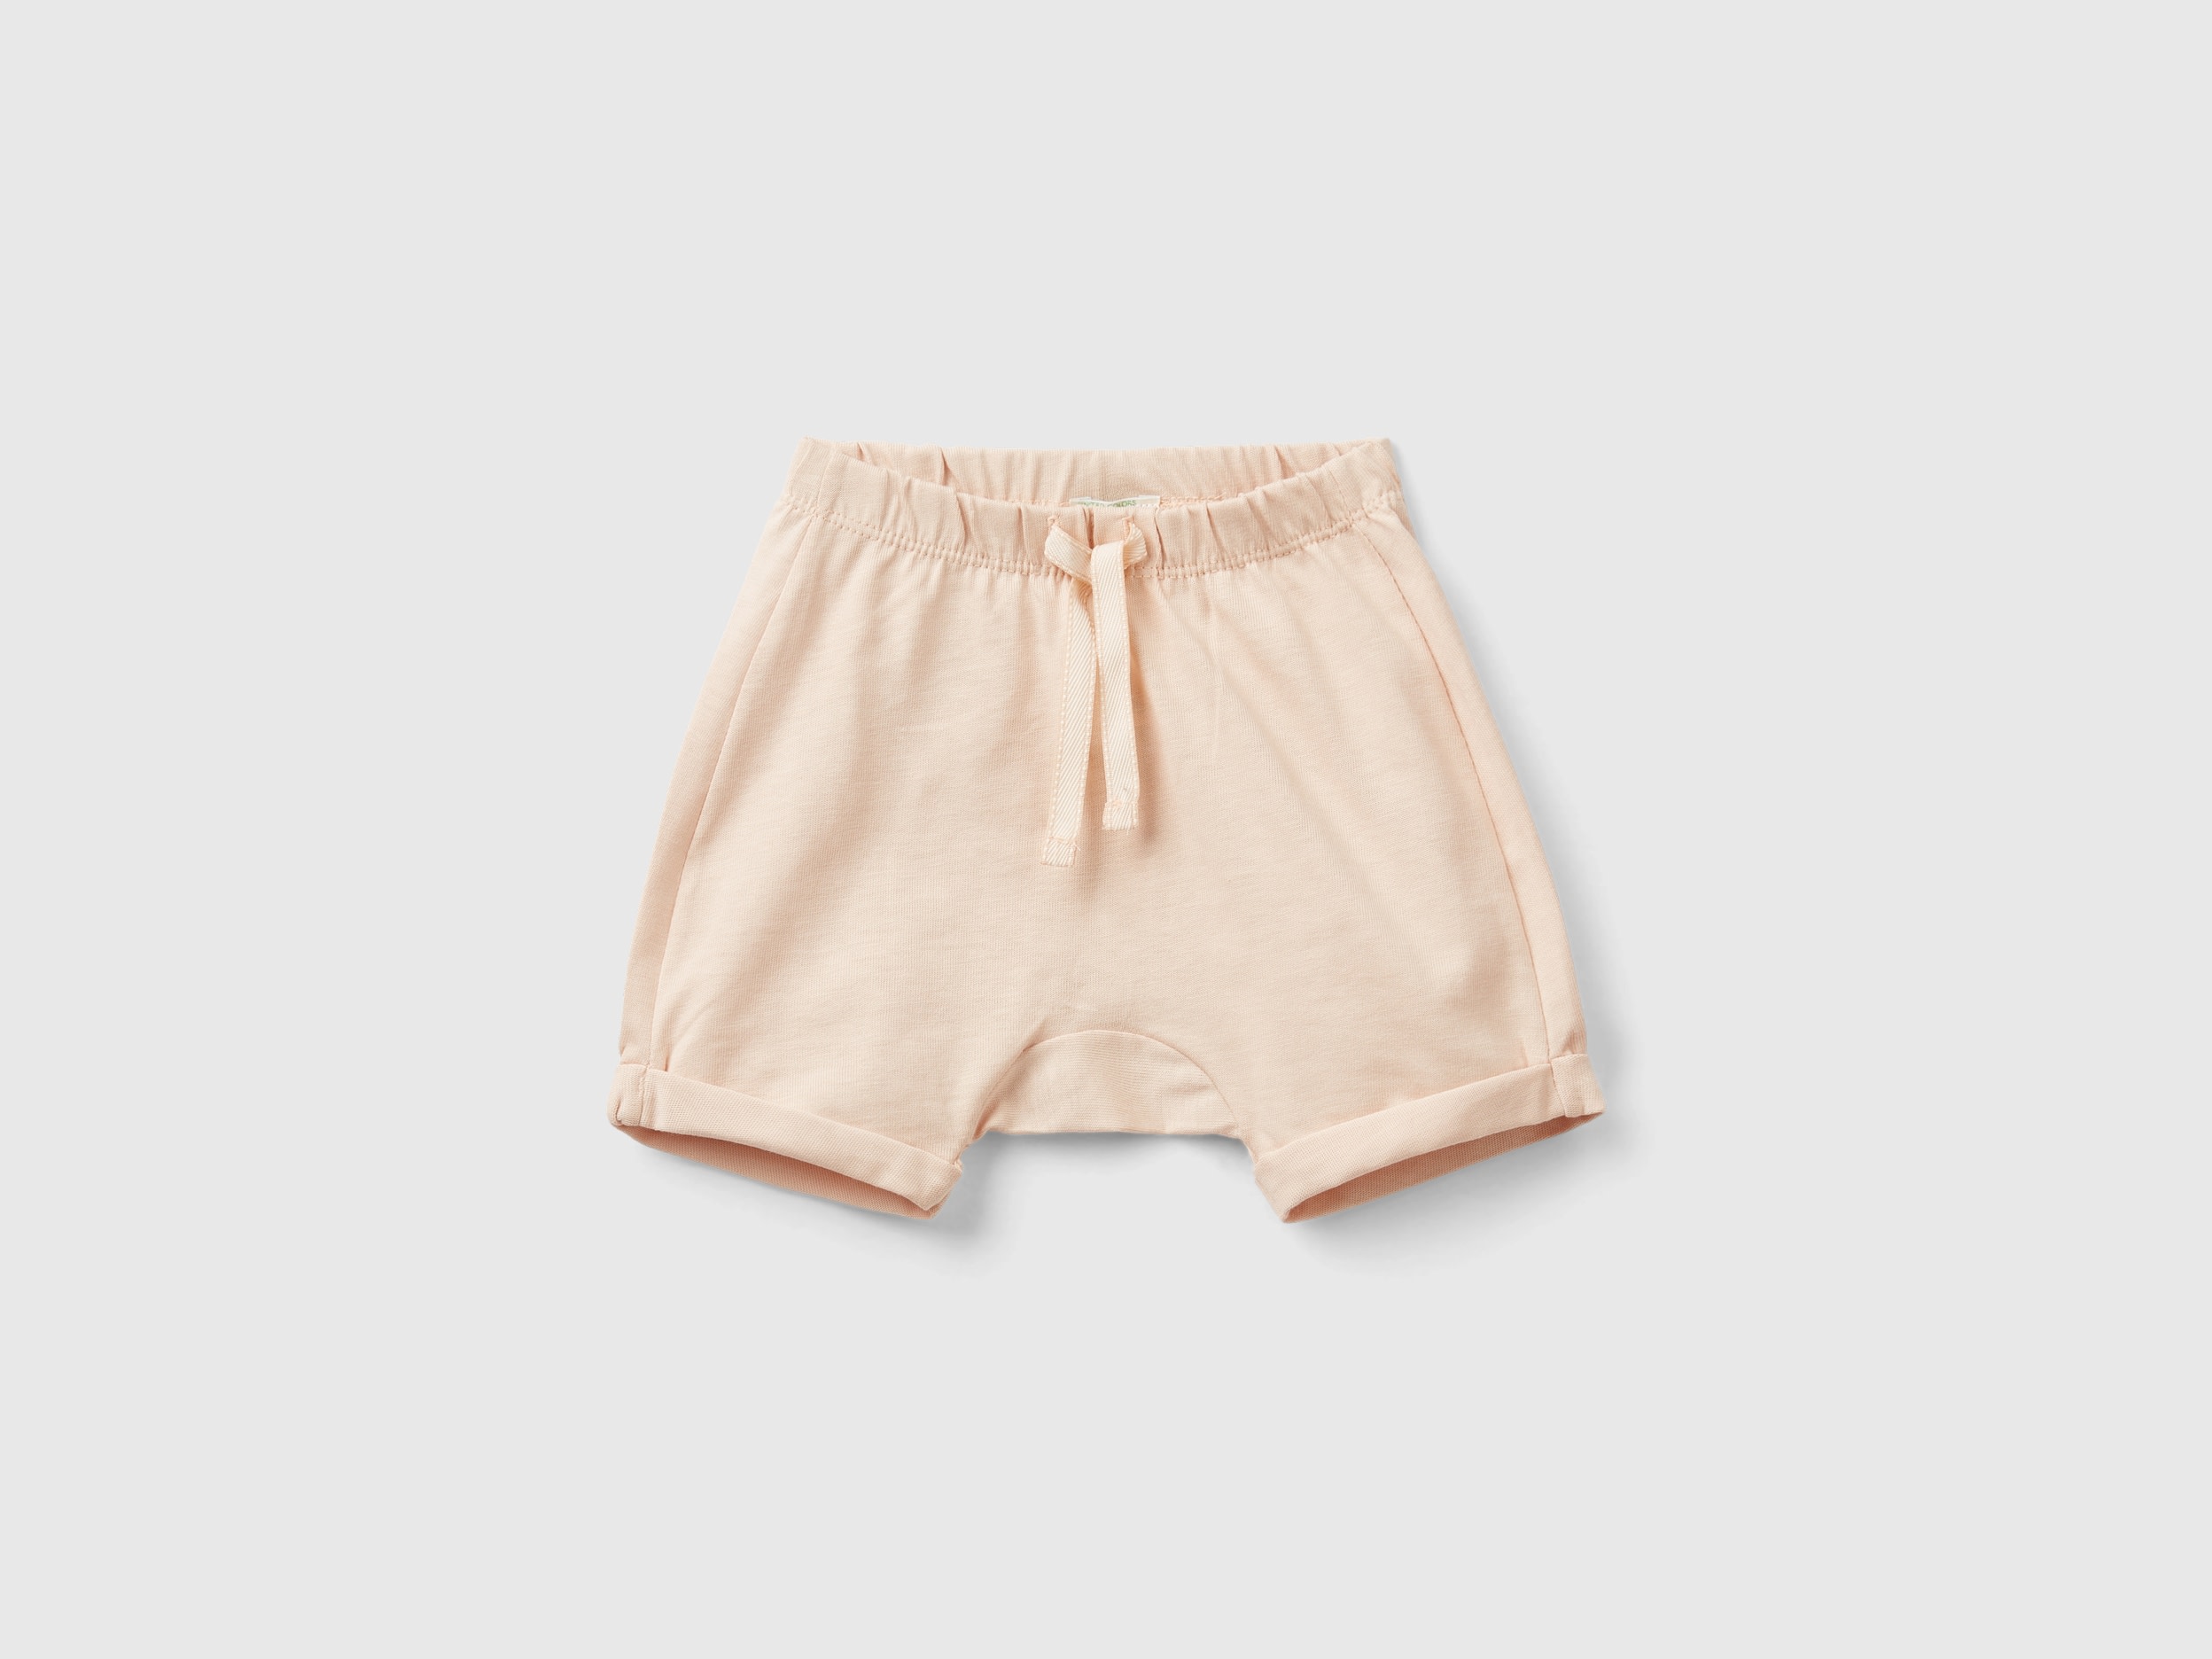 Image of Benetton, Shorts With Patch On The Back, size 56, Peach, Kids